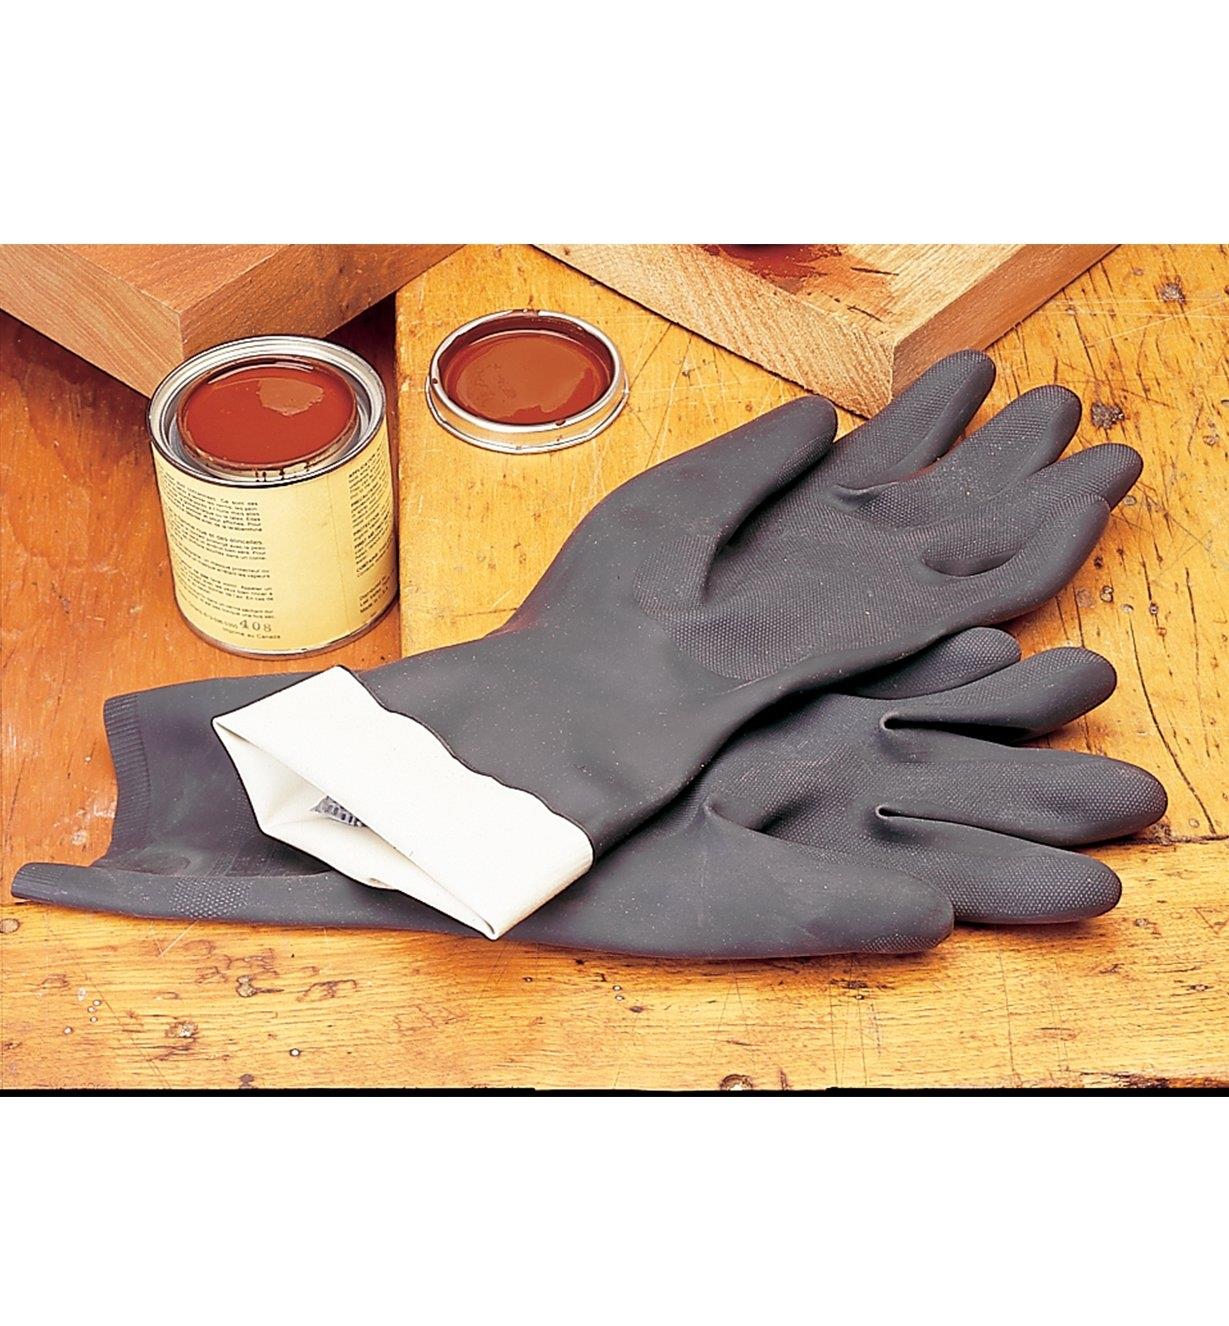 Neoprene Gloves lying next to a can of stain